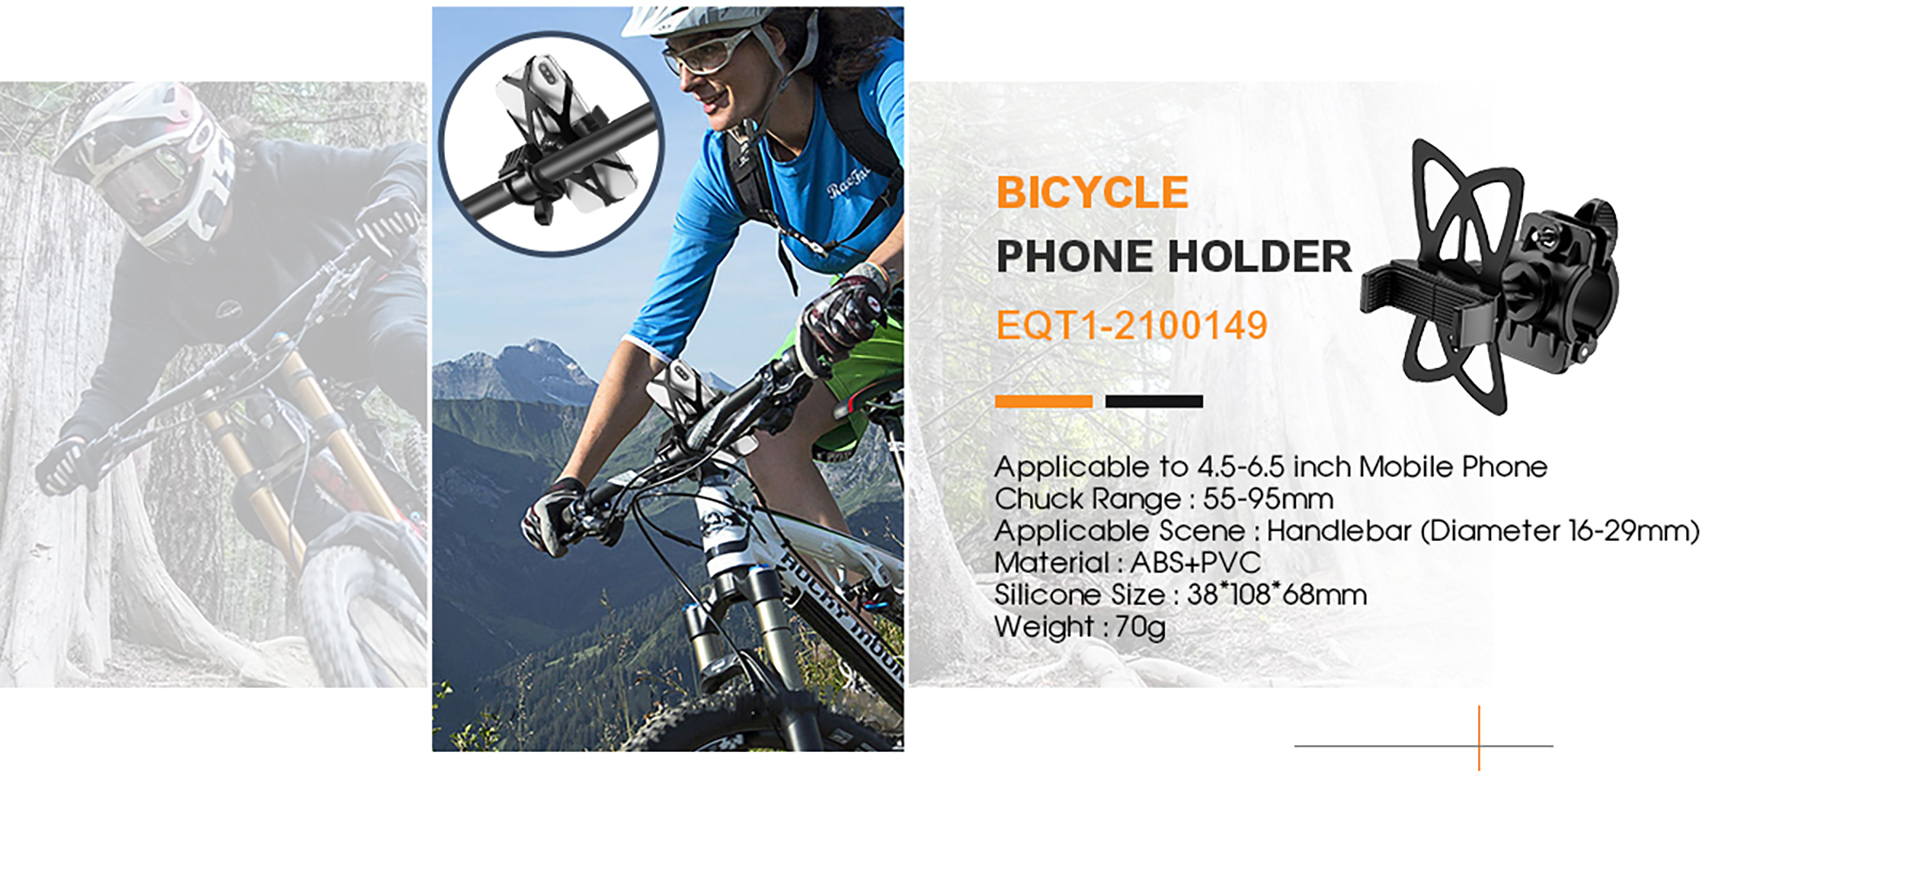 bicycle phone holder to settle your phone while outdoor cycling